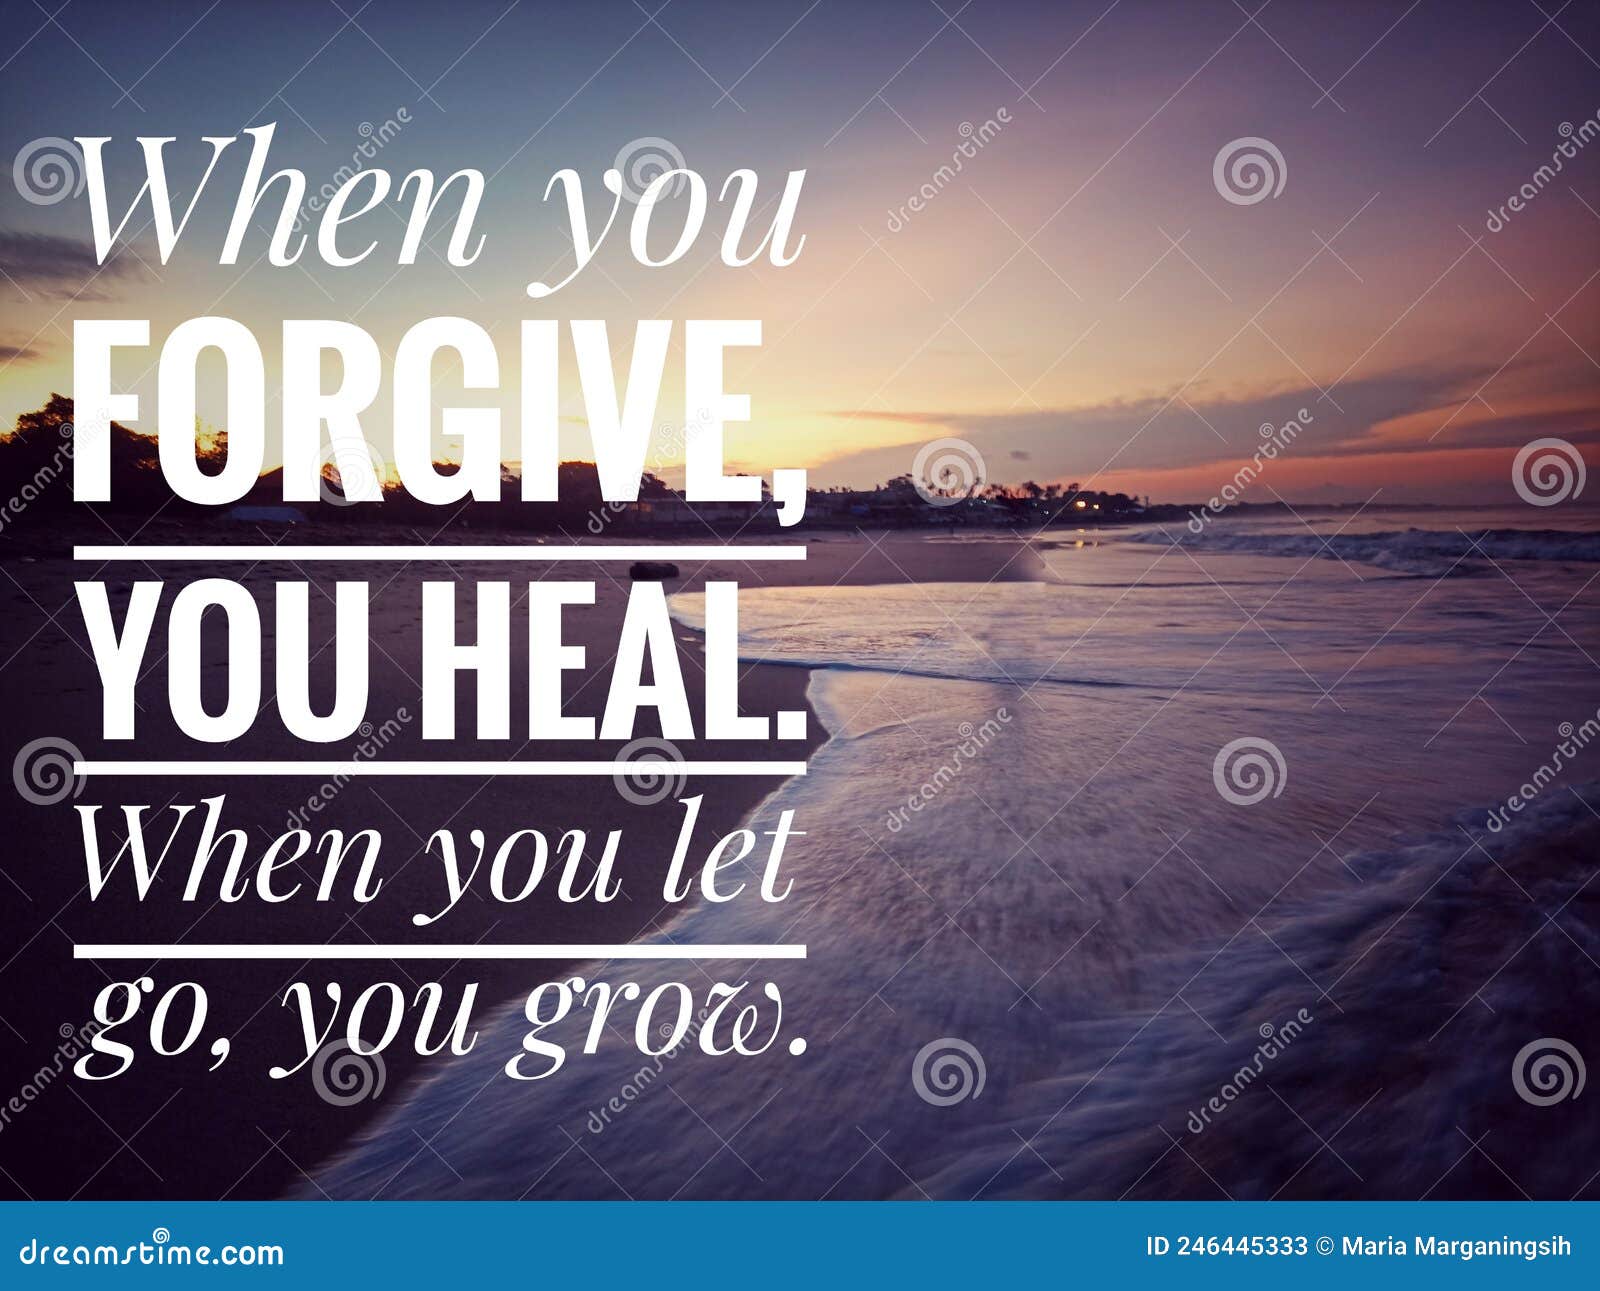 forgiveness inspirational words - when you forgive, you heal. when you let go, you grow. forgiving quote with beach sunrise.